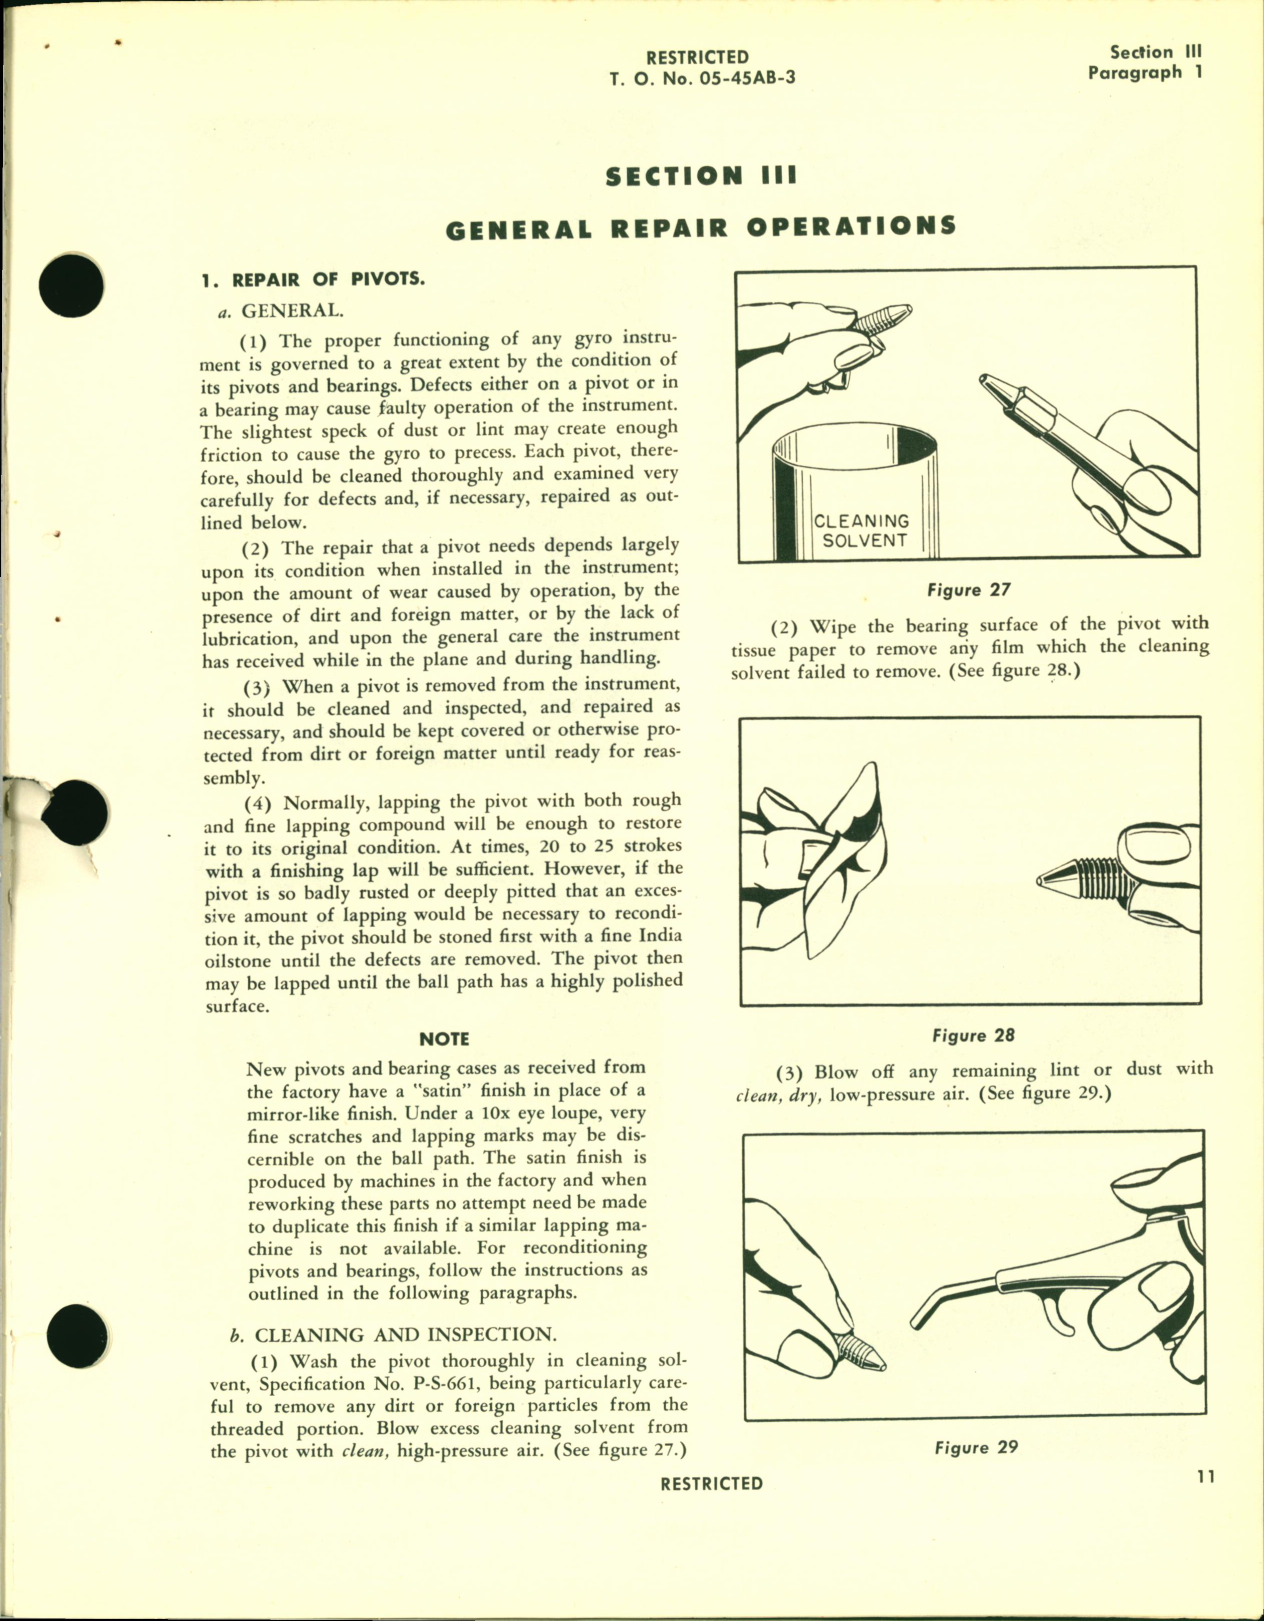 Sample page 11 from AirCorps Library document: Overhaul Instructions for Automatic Pilot Type A-3